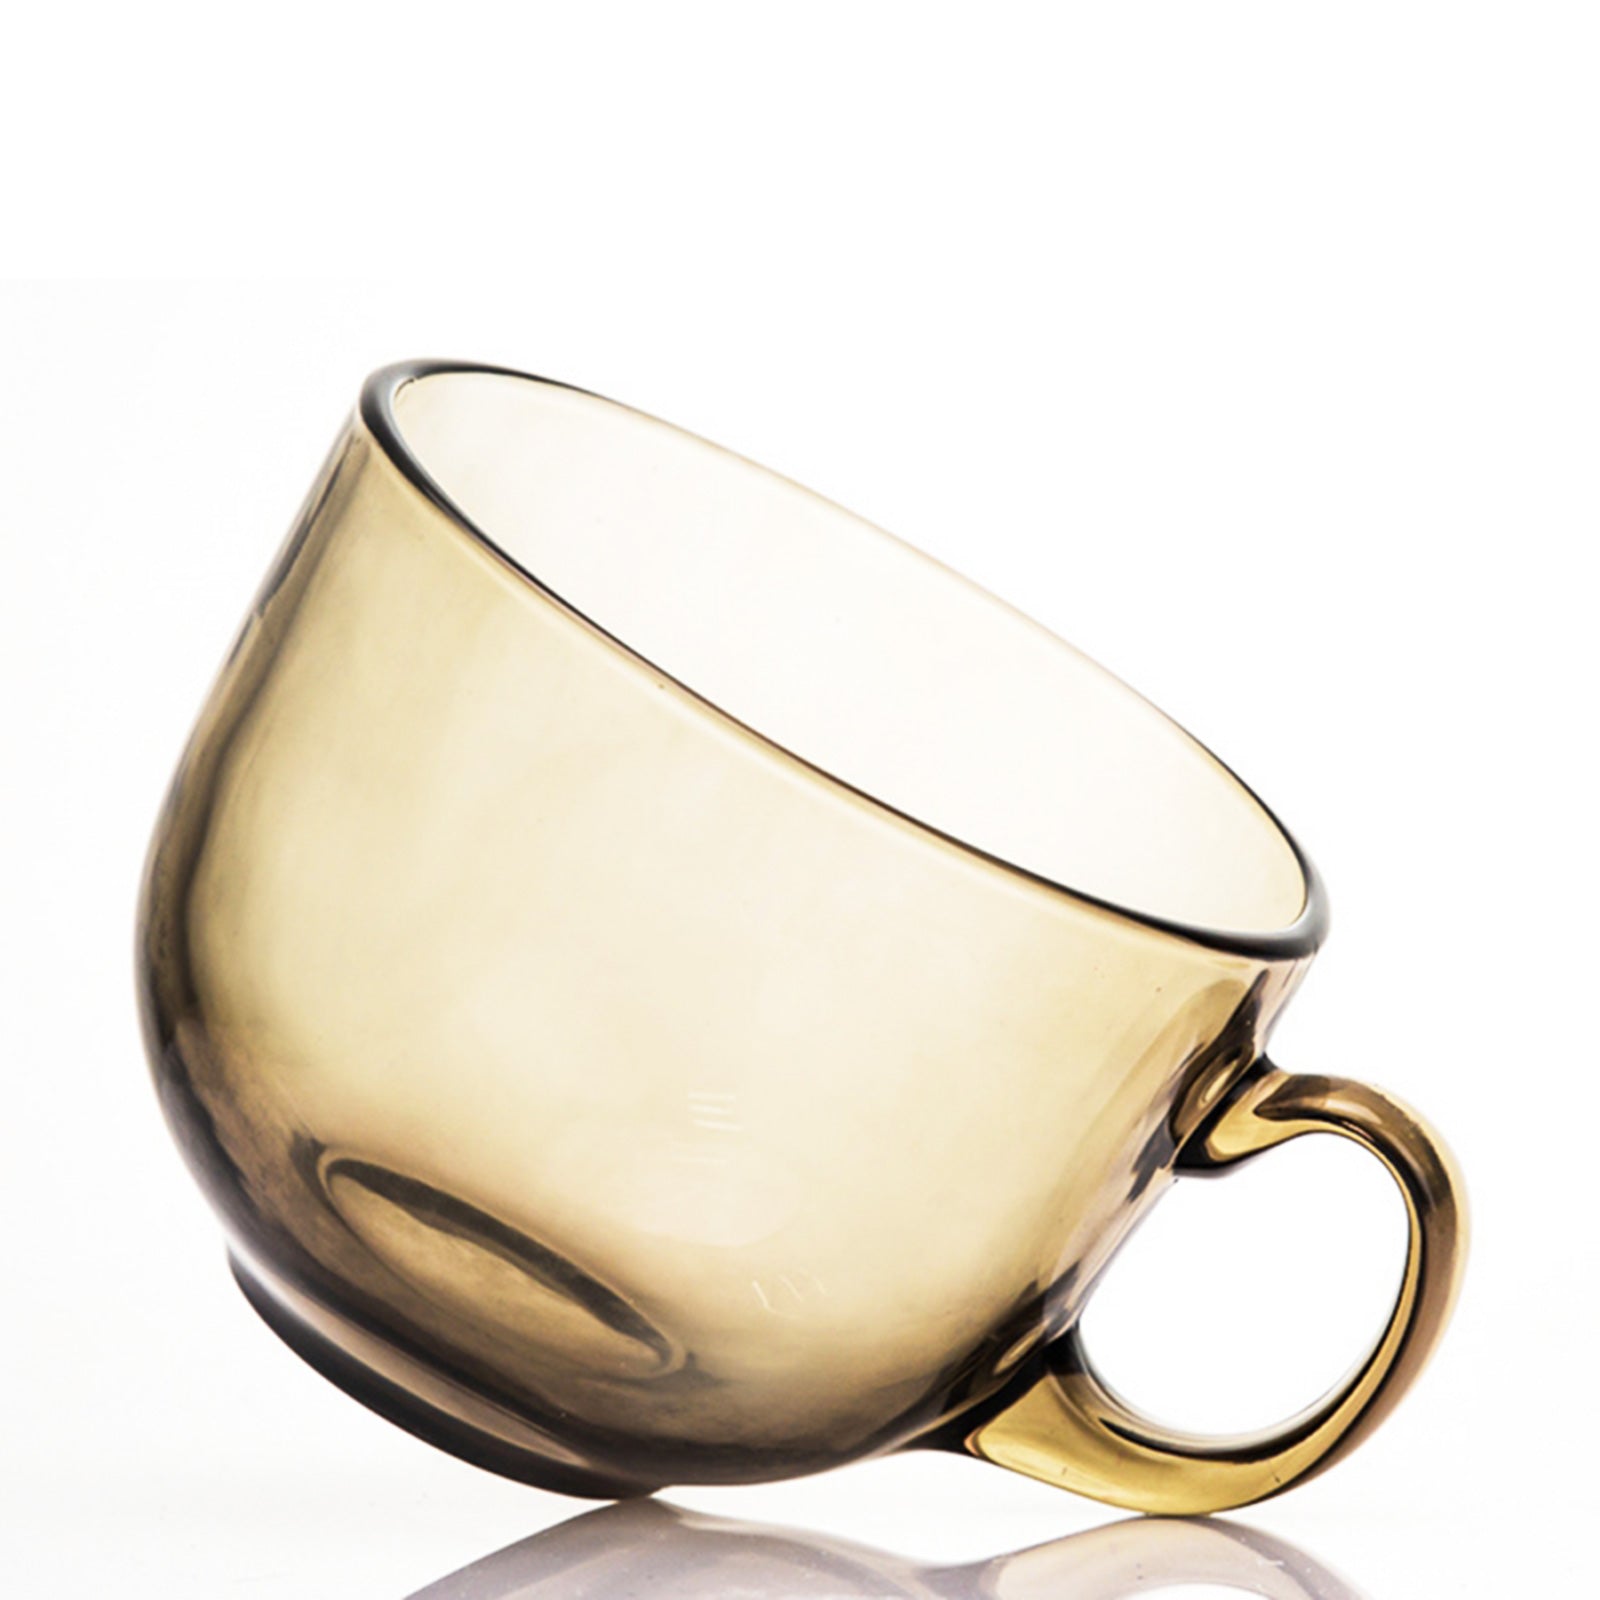 Amber-colored, Heat-Resistant Glass Breakfast Mugs